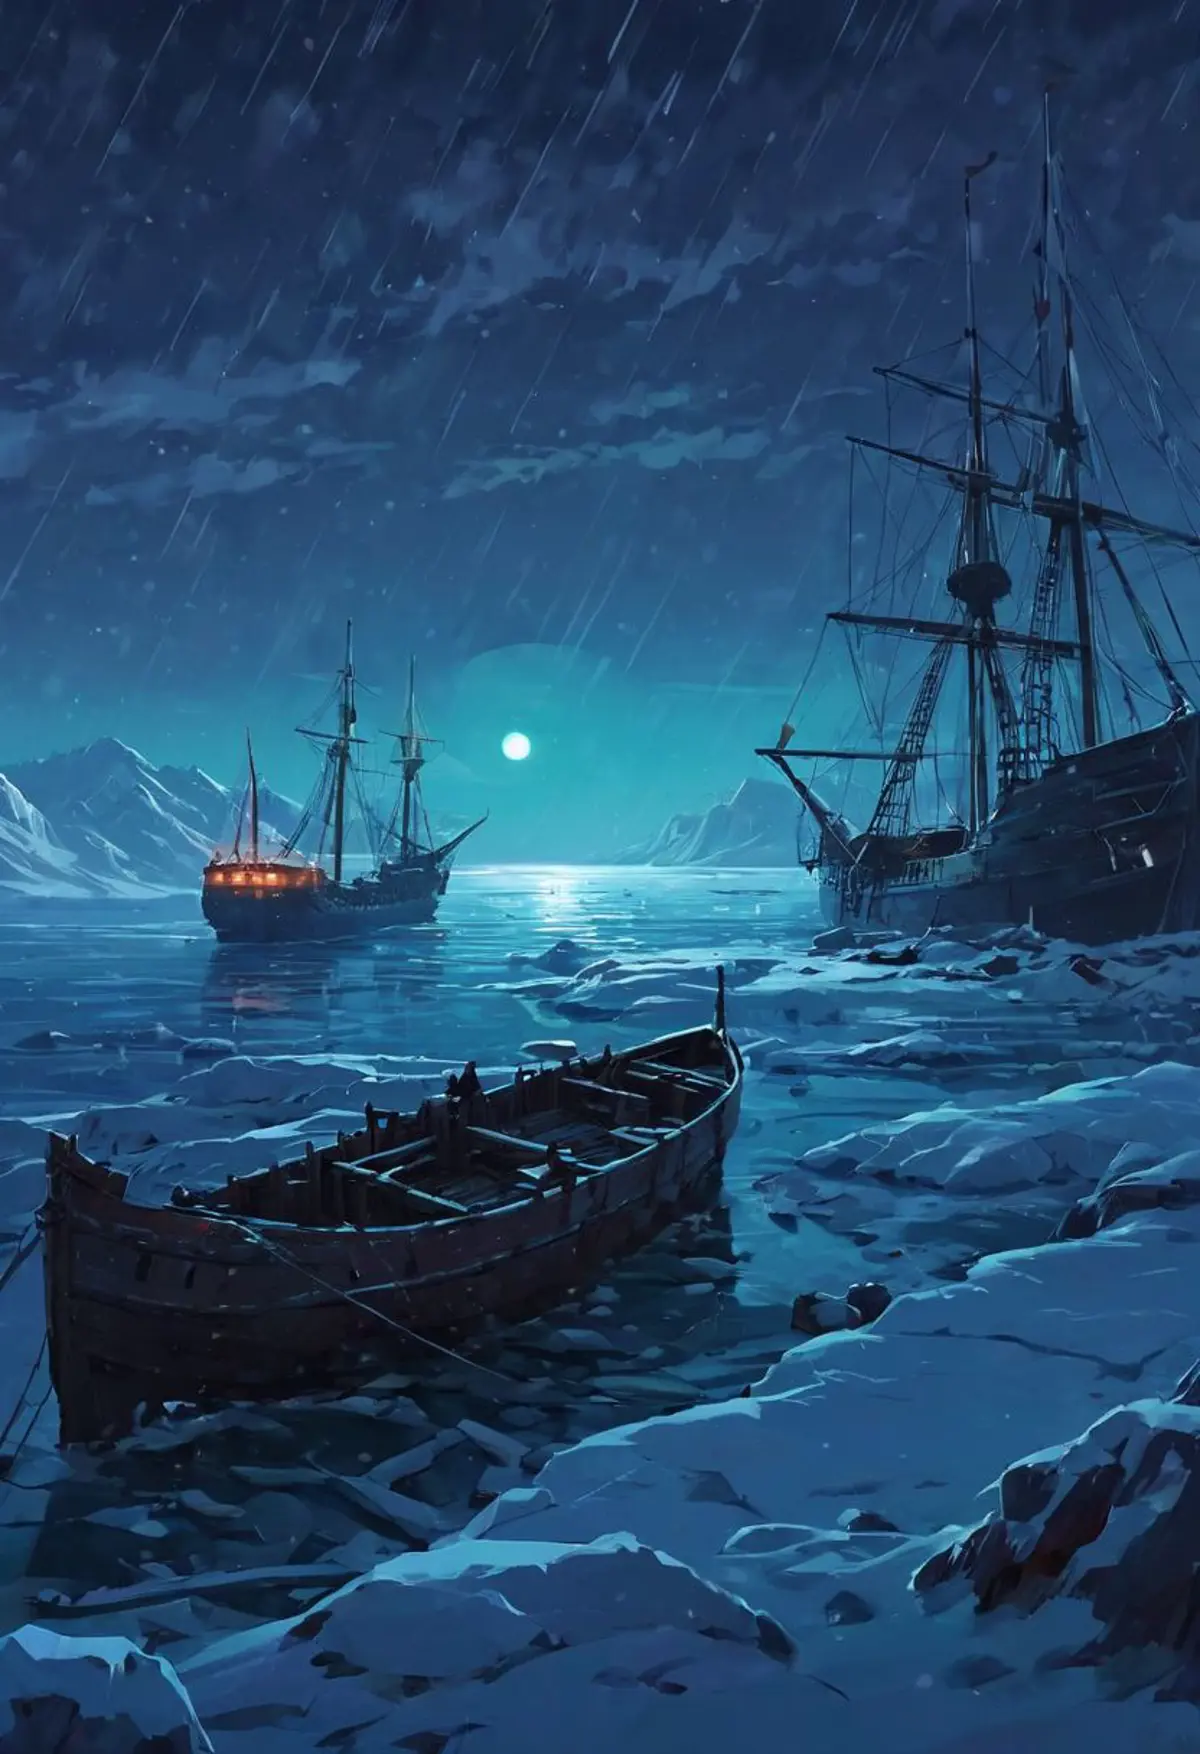 Two large sailing ships are anchored in the distance, bathed in the soft glow of the moonlight that reflects off the calm sea waters. One ship is completely dark, while light is visible emanating from the from aft of the other one. In the foreground, a small wooden boat rests on the snow-covered shore, 